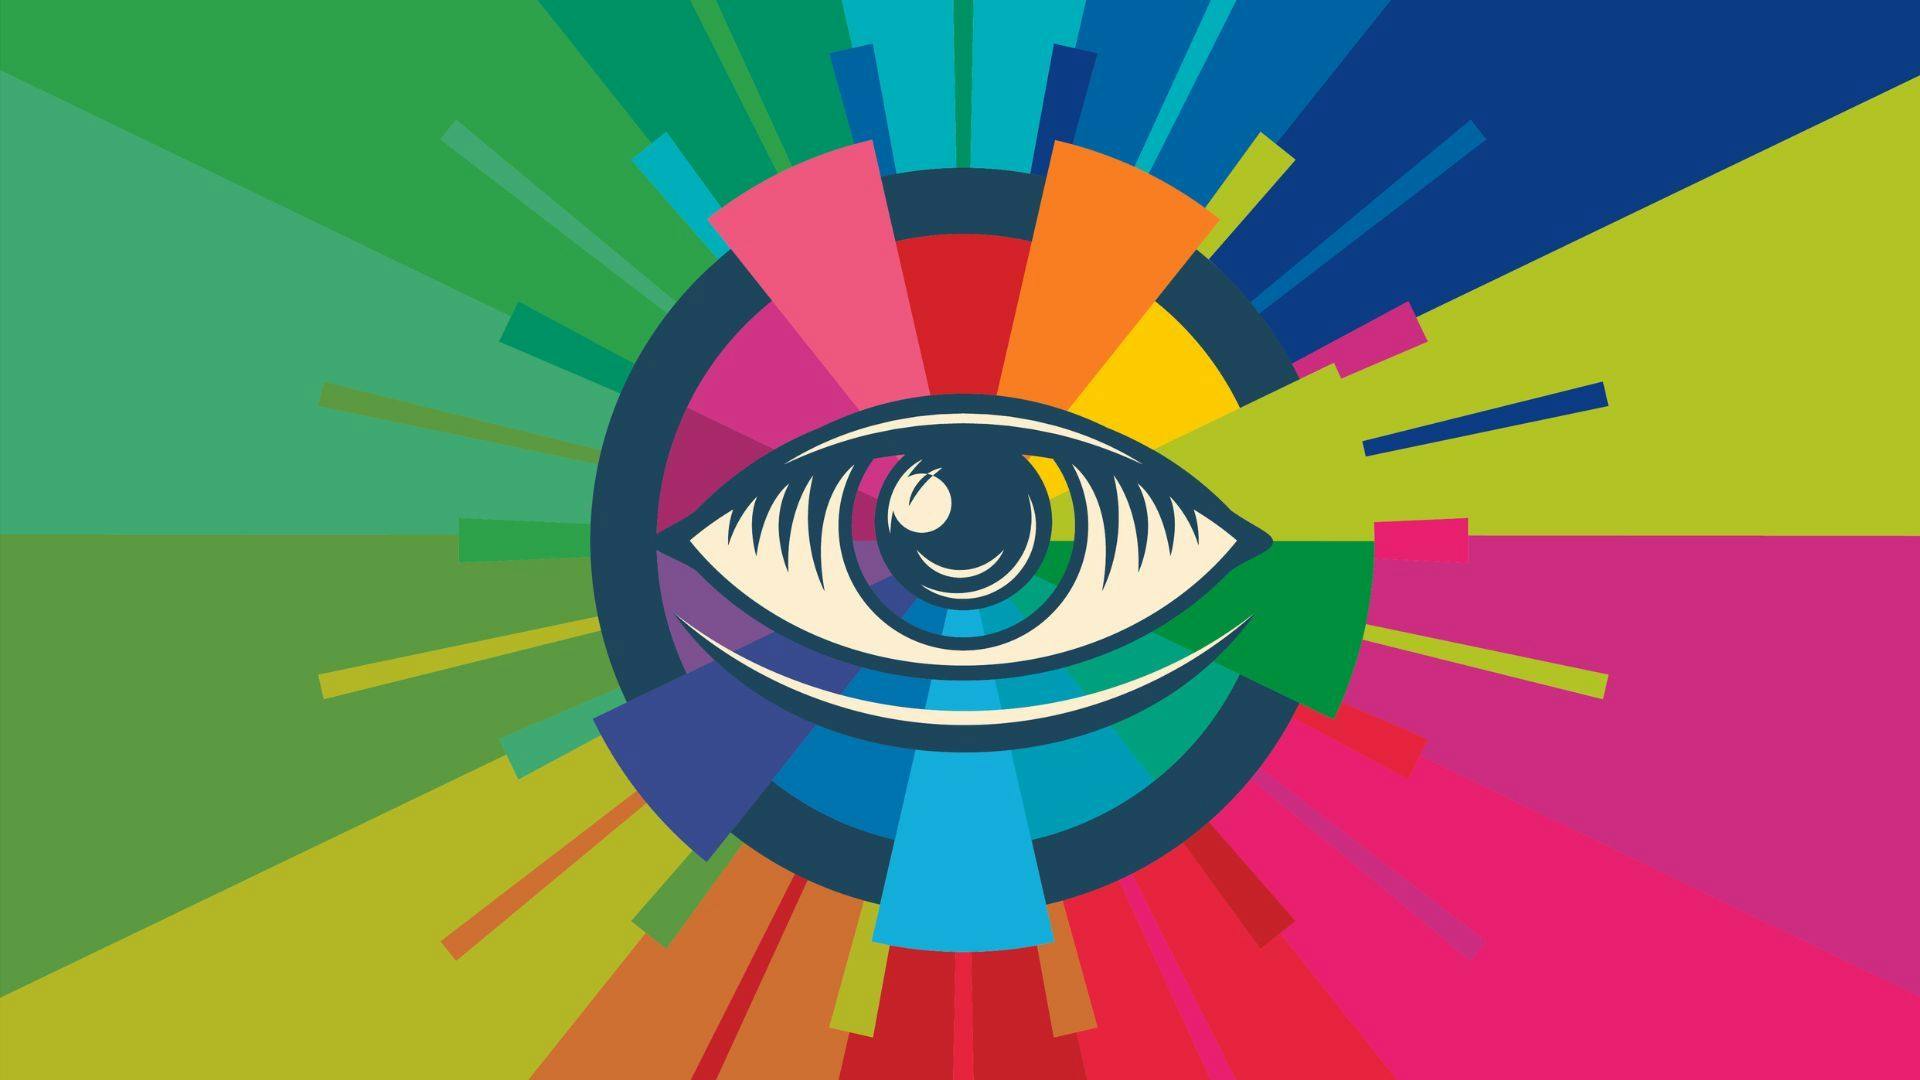 multi-colored graphic with an eye in the center 